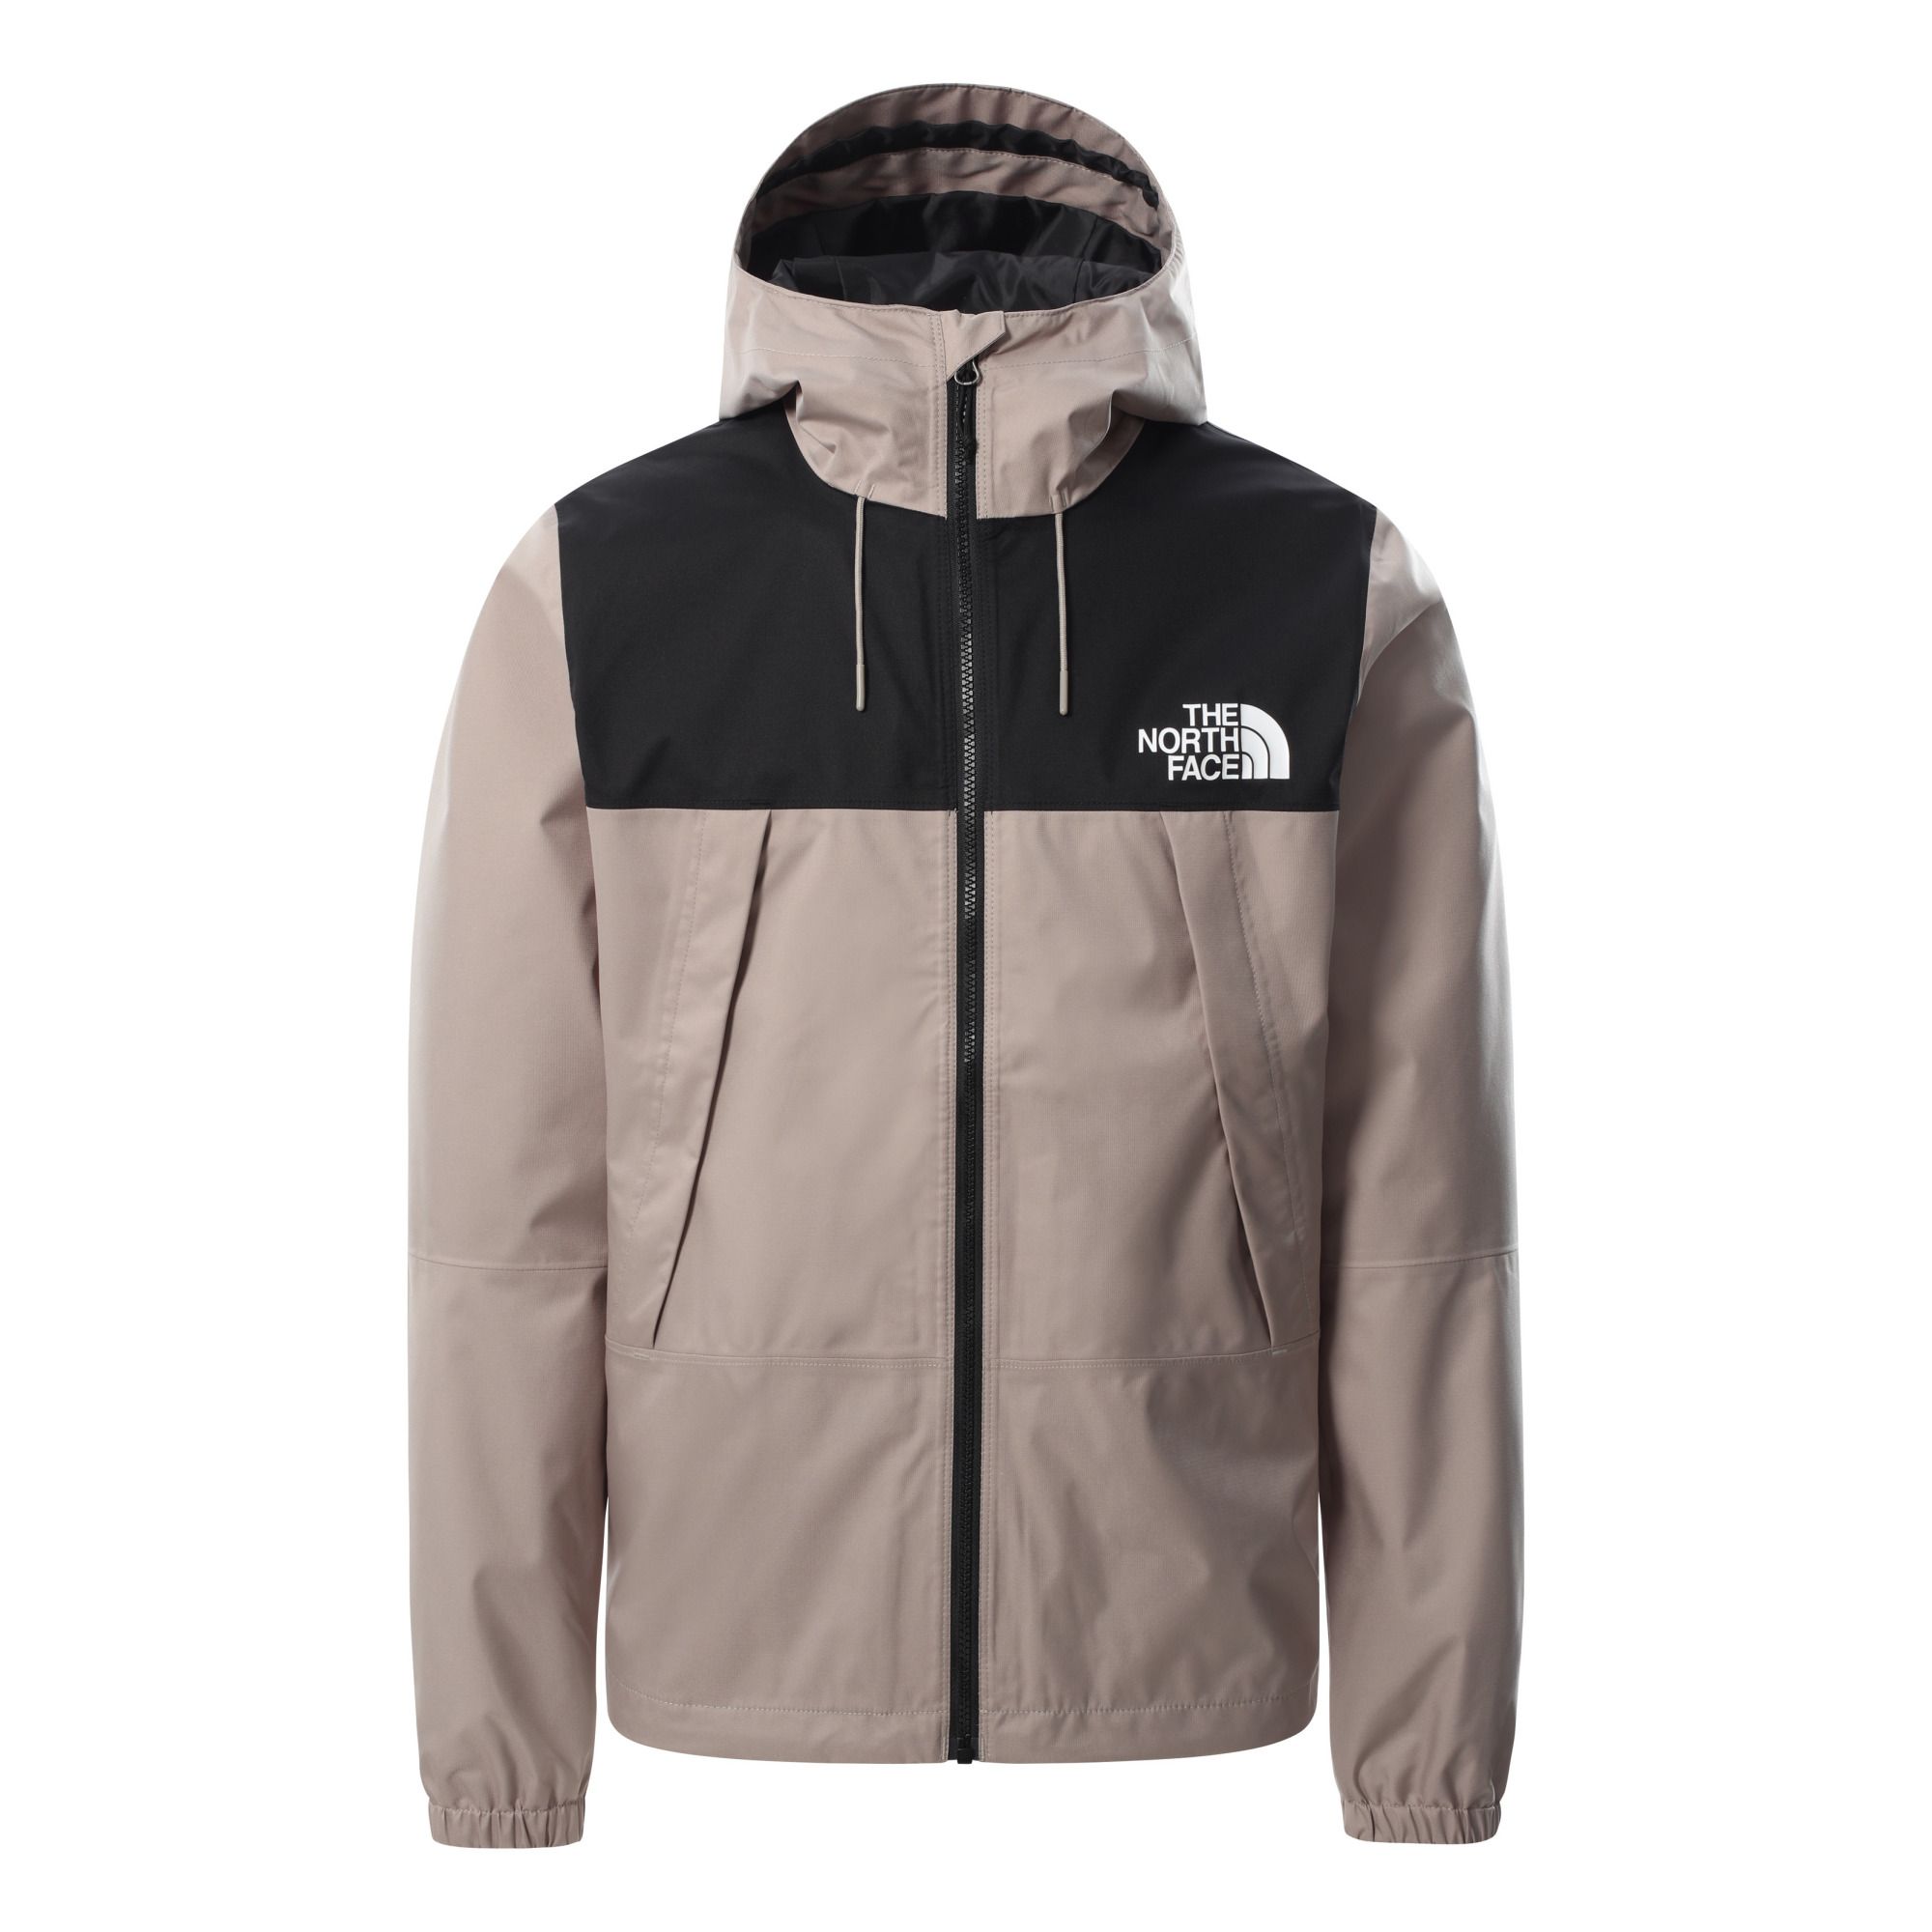 The North Face - Veste - Collection Homme - - Homme - Gris taupe